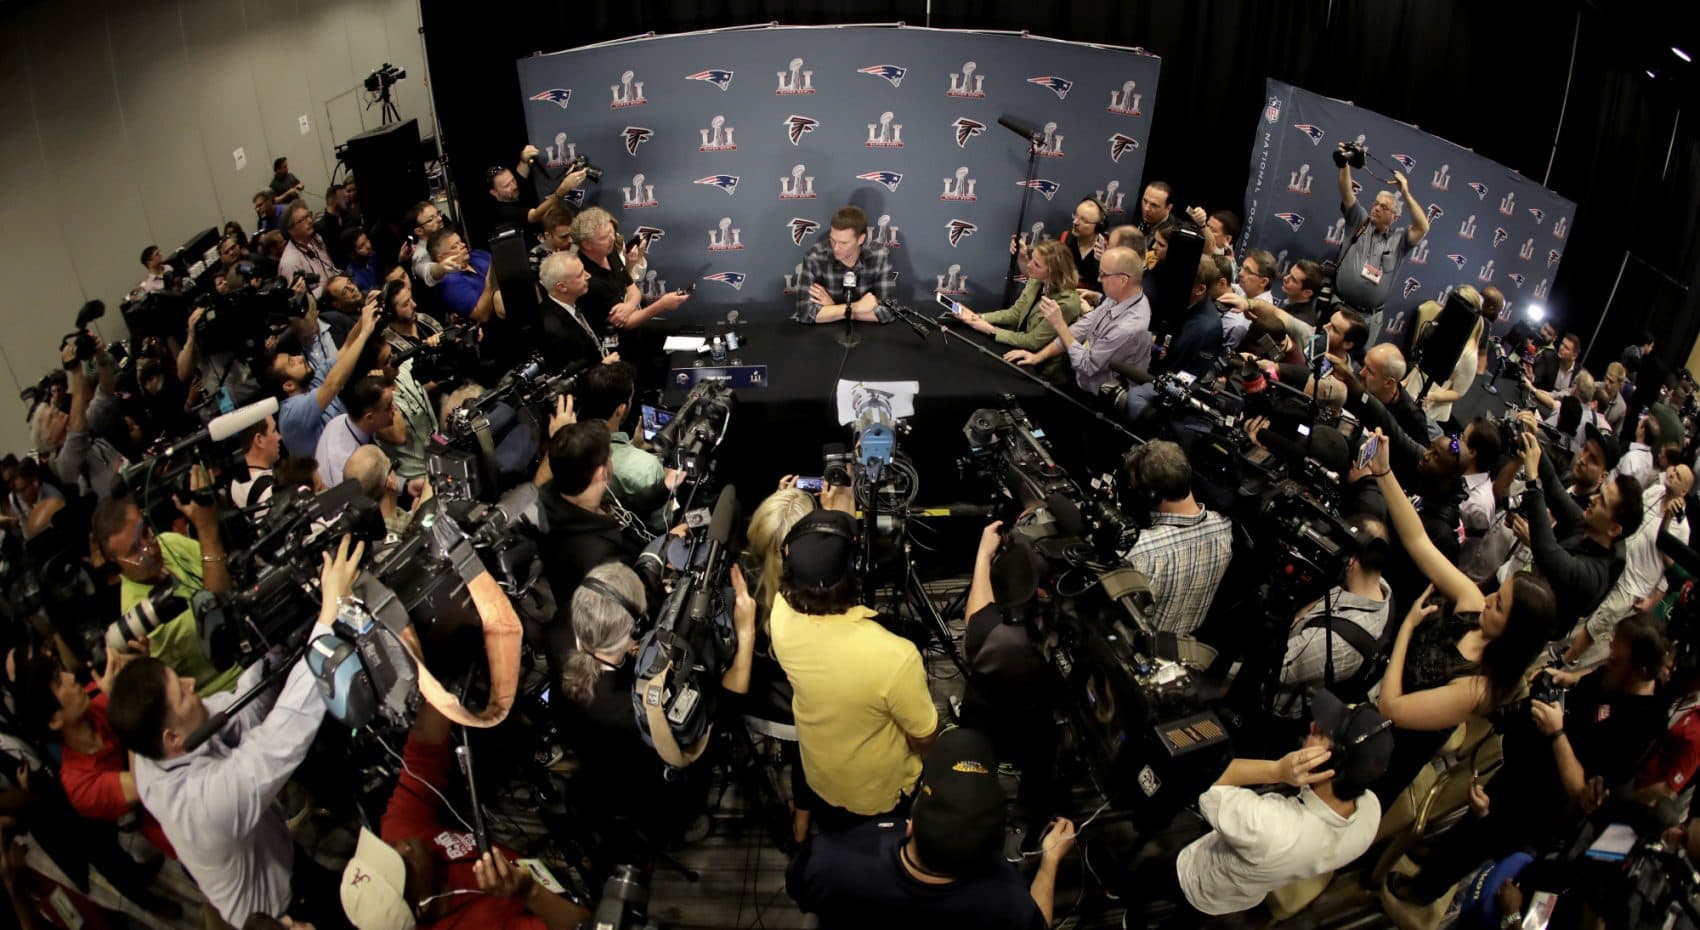 Pre-Super Bowl Houston feels like an alternate reality, writes Shira Springer. It's a land in which Tom Brady’s brand of blinders-on positivity can thrive, and the NFL brand can shine. Pictured: New England Patriots quarterback Tom Brady talks to the media during a news conference for the NFL Super Bowl 51 football game against the Atlanta Falcons. Tuesday, Jan. 31, 2017, in Houston. (Charlie Riedel/AP)